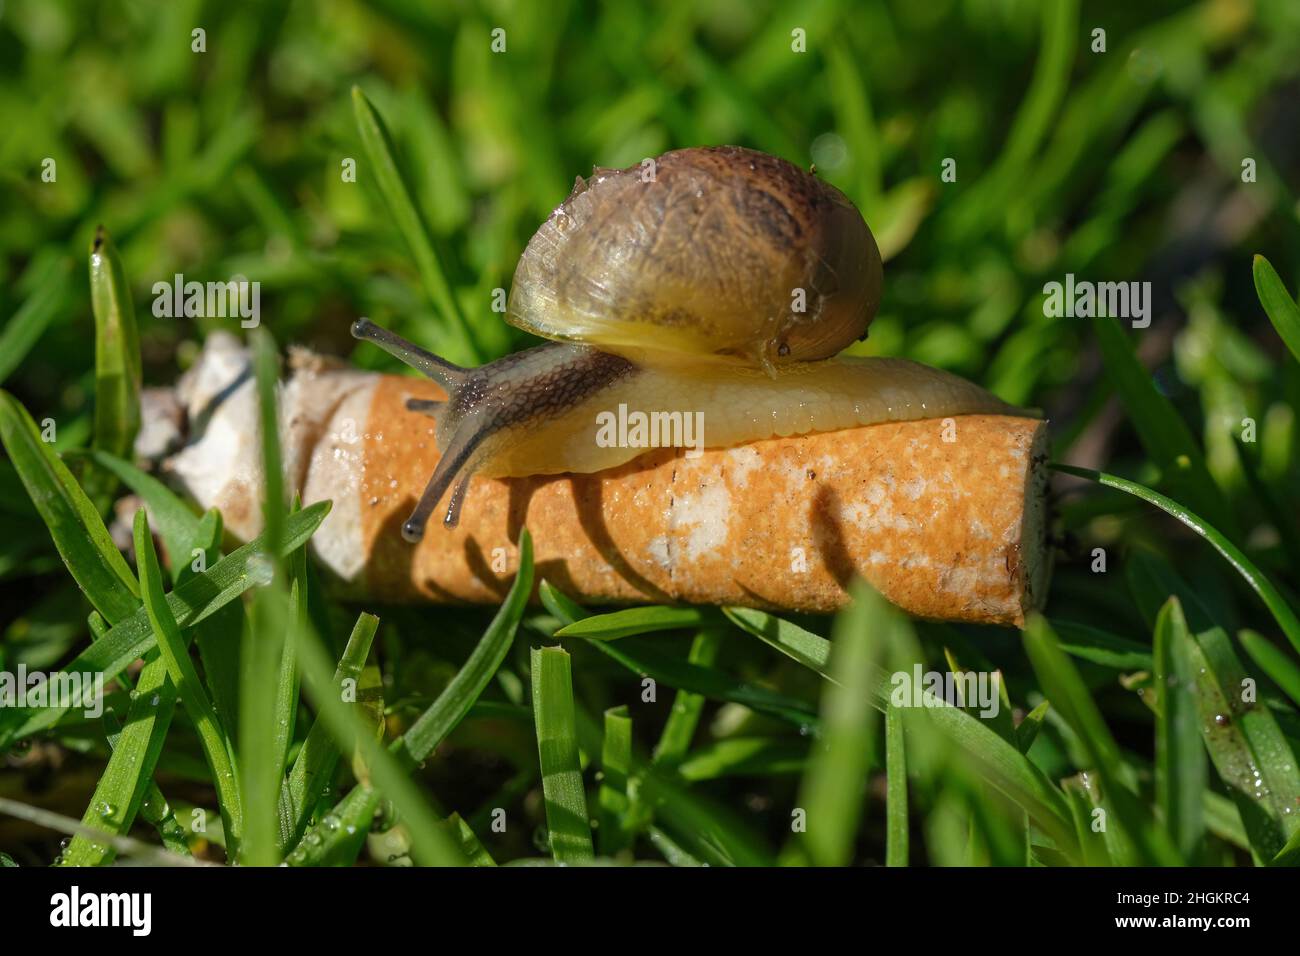 Wild snail crawling on discarded cigarette butt in polluted ecosystem,nature animals Stock Photo